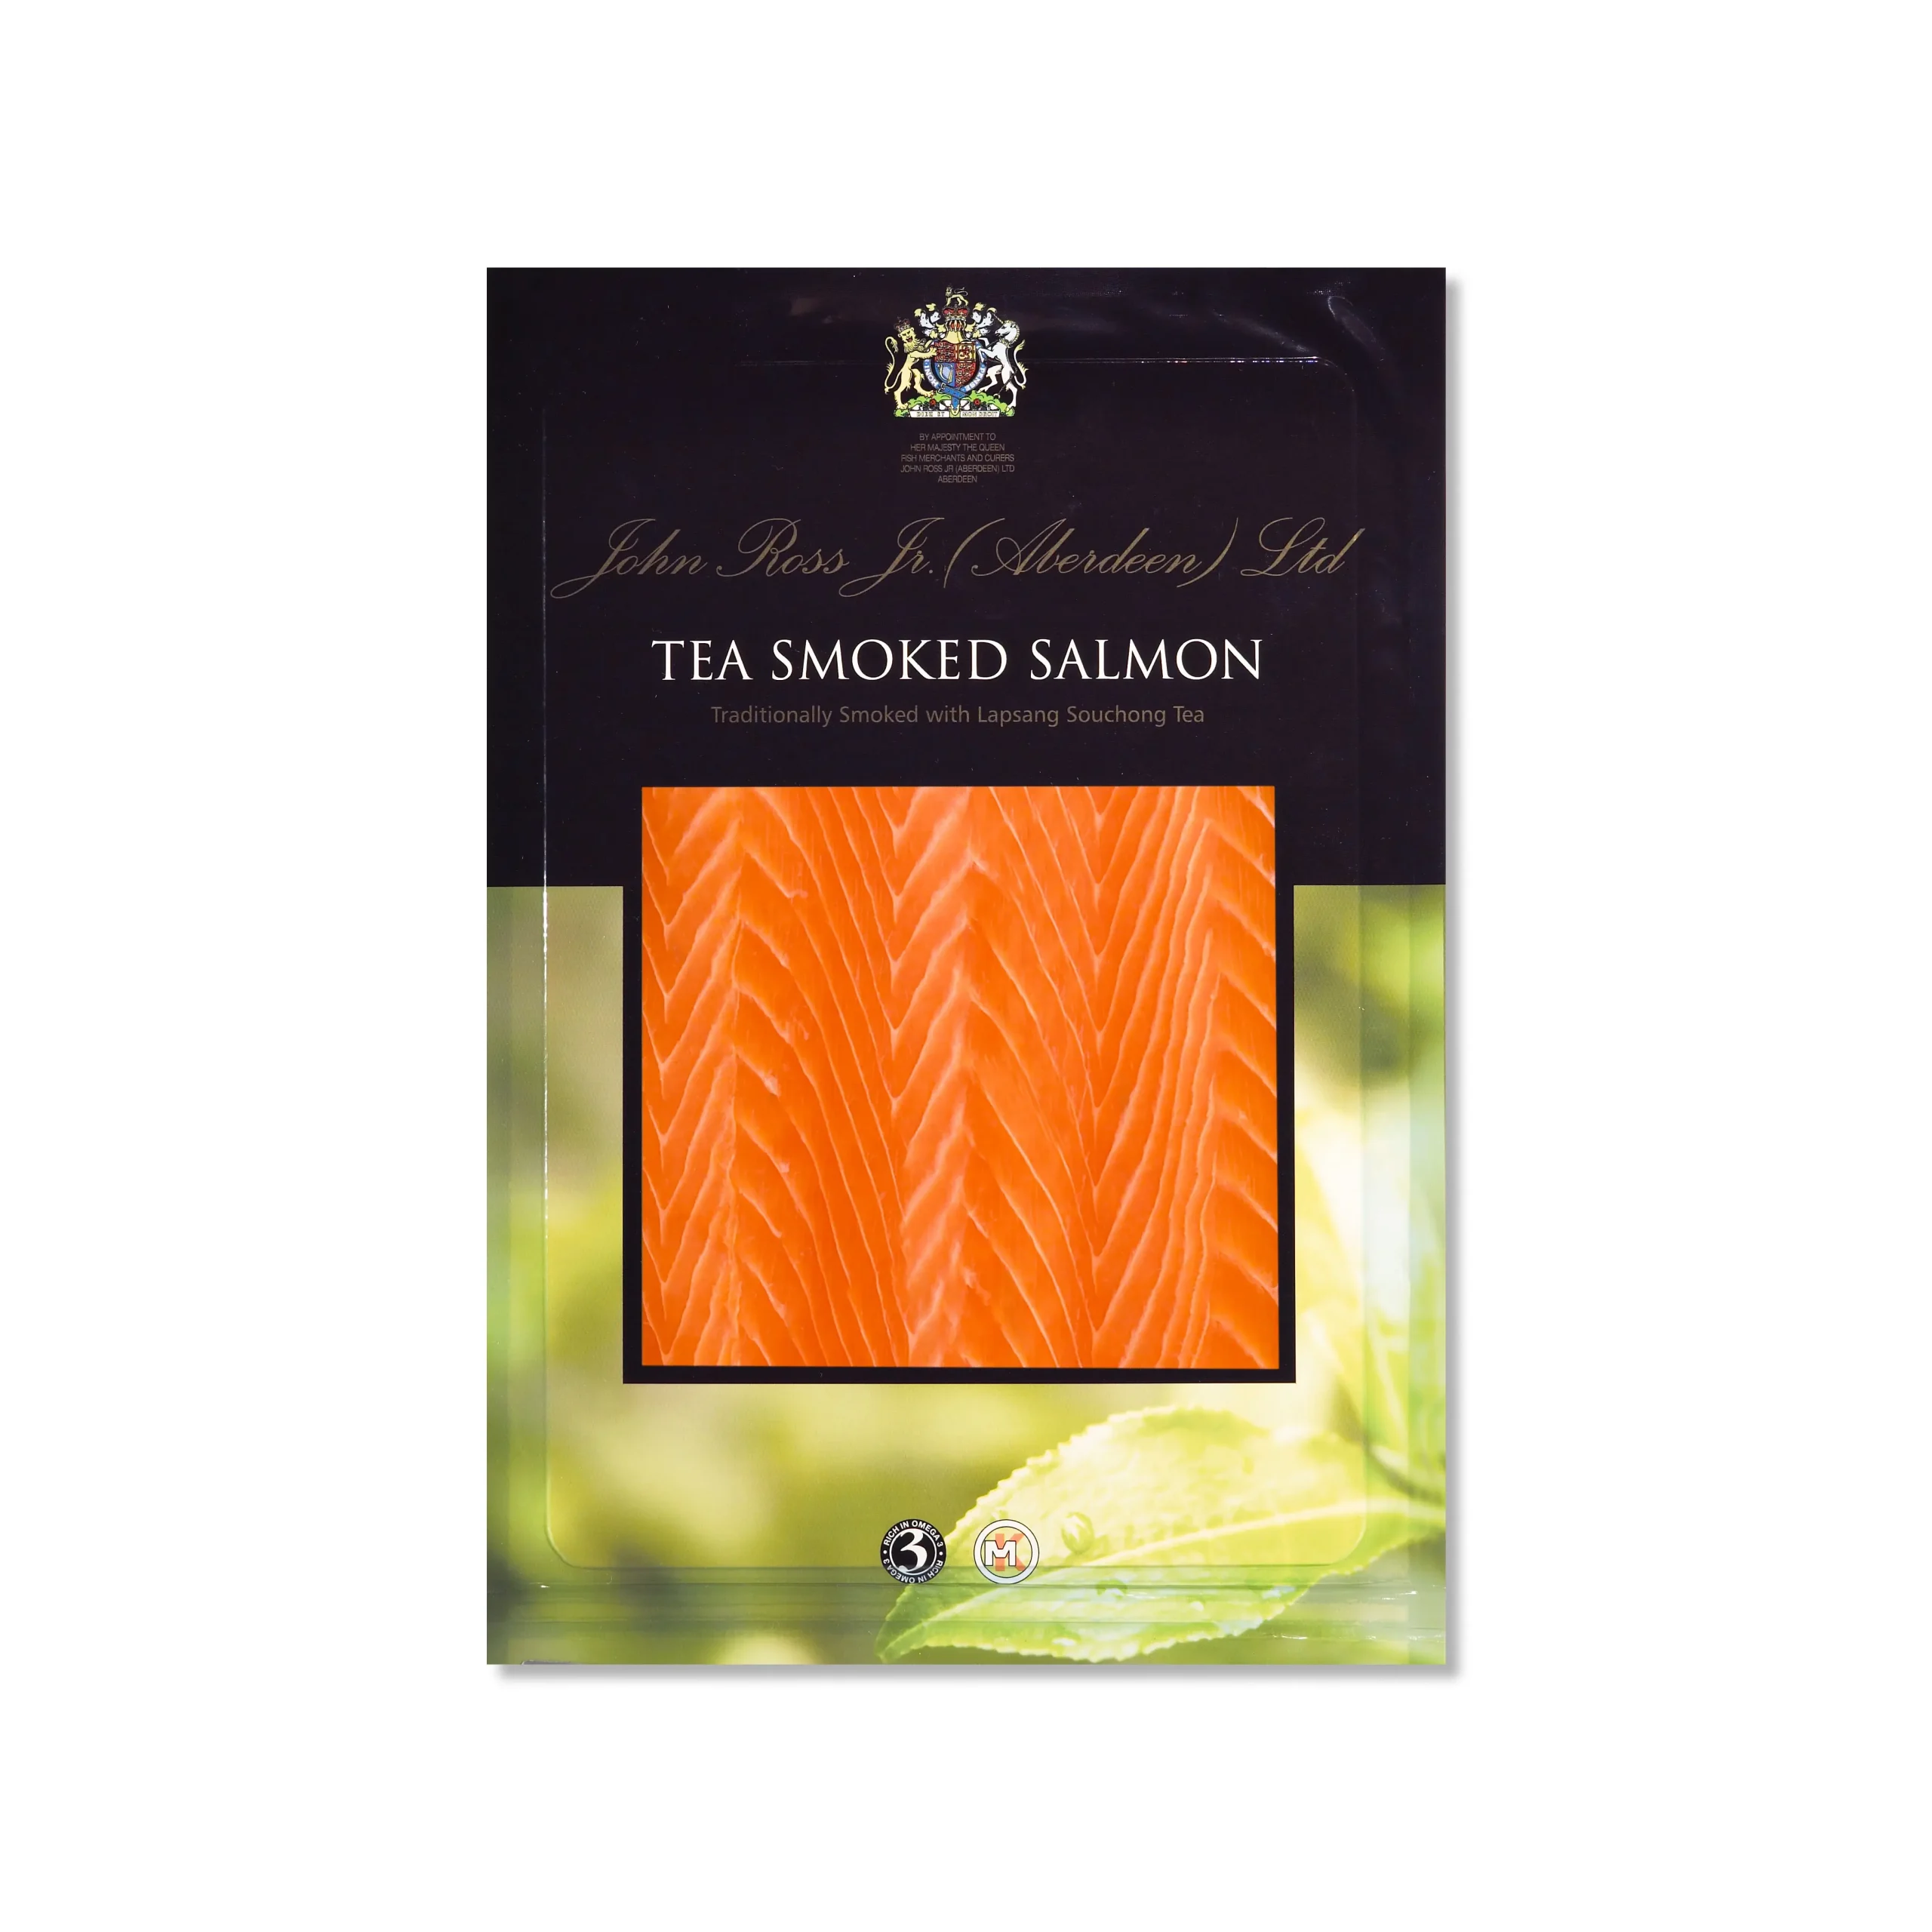 lapsang souchong tea smoked salmon - What do you eat with Lapsang Souchong tea